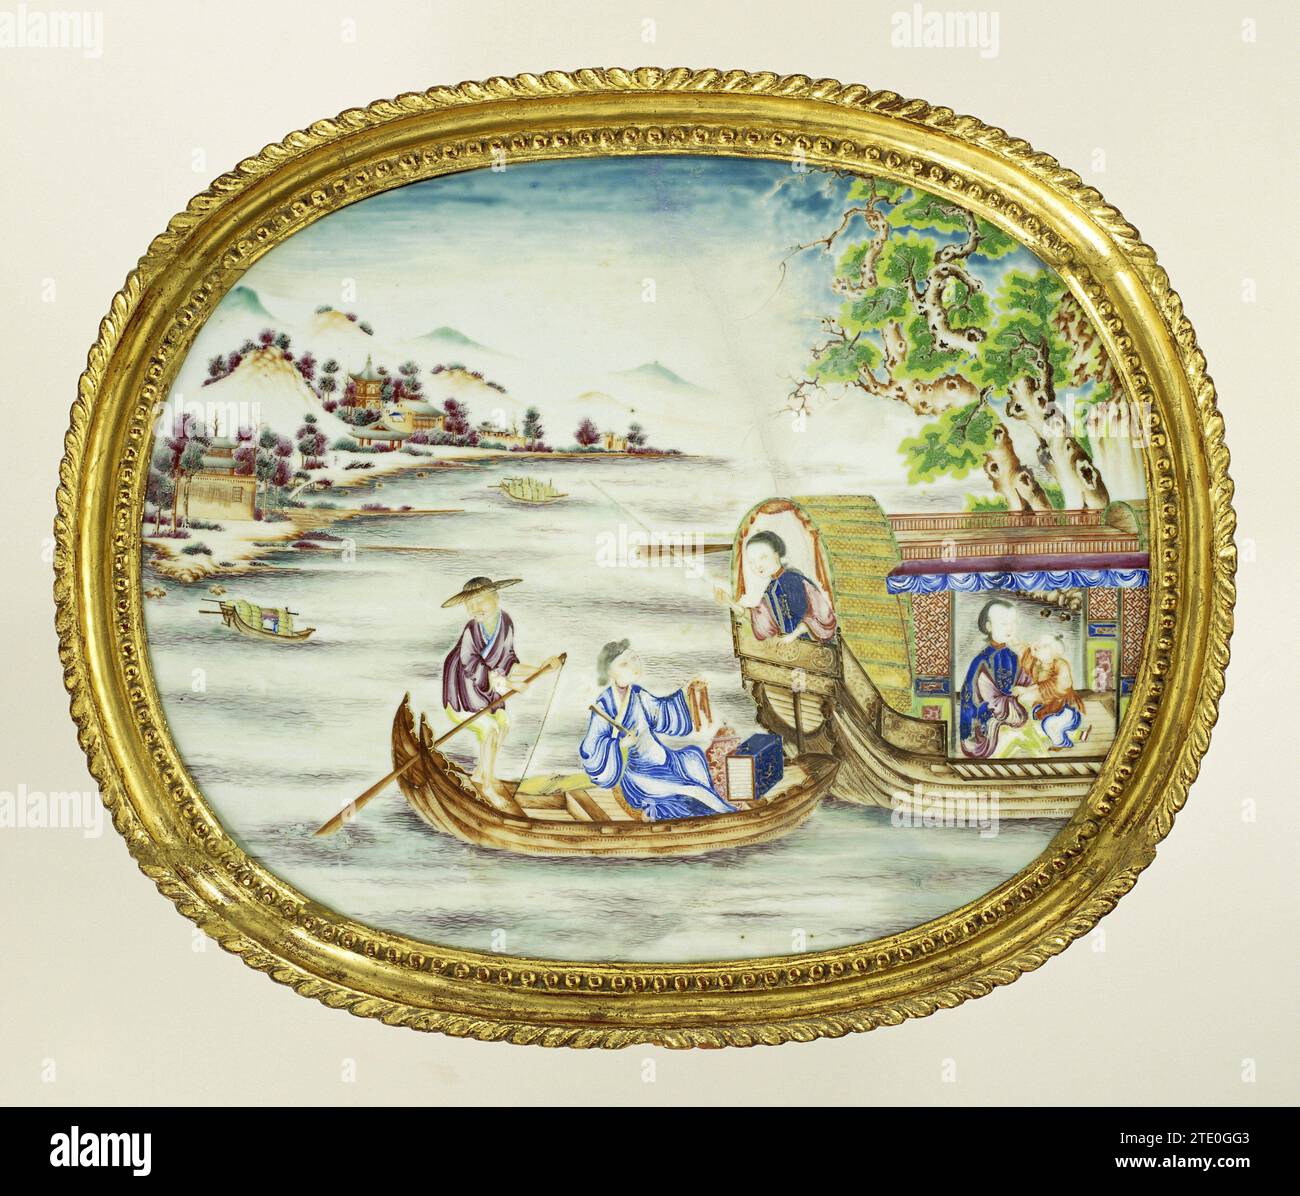 Oval panel with figures in boats in a riverlandscape, anonymous, c. 1770 - c. 1775 Porcelain oval plaque, painted on the glaze in blue, red, pink, green, yellow, purple, brown, black and gold. The show shows a river landscape with mountains, trees, pavilions and boats. In the foreground a small boat with a rower and a man with objects. They sail next to a larger boat, where a woman leans from the rear. The man shows her an object. In the larger boat a second woman and a boy. Original gilded list. Porcelain with email colors. China Porcelain. Glaze. Gold (Metal). List: Wood (Plant Material) pai Stock Photo